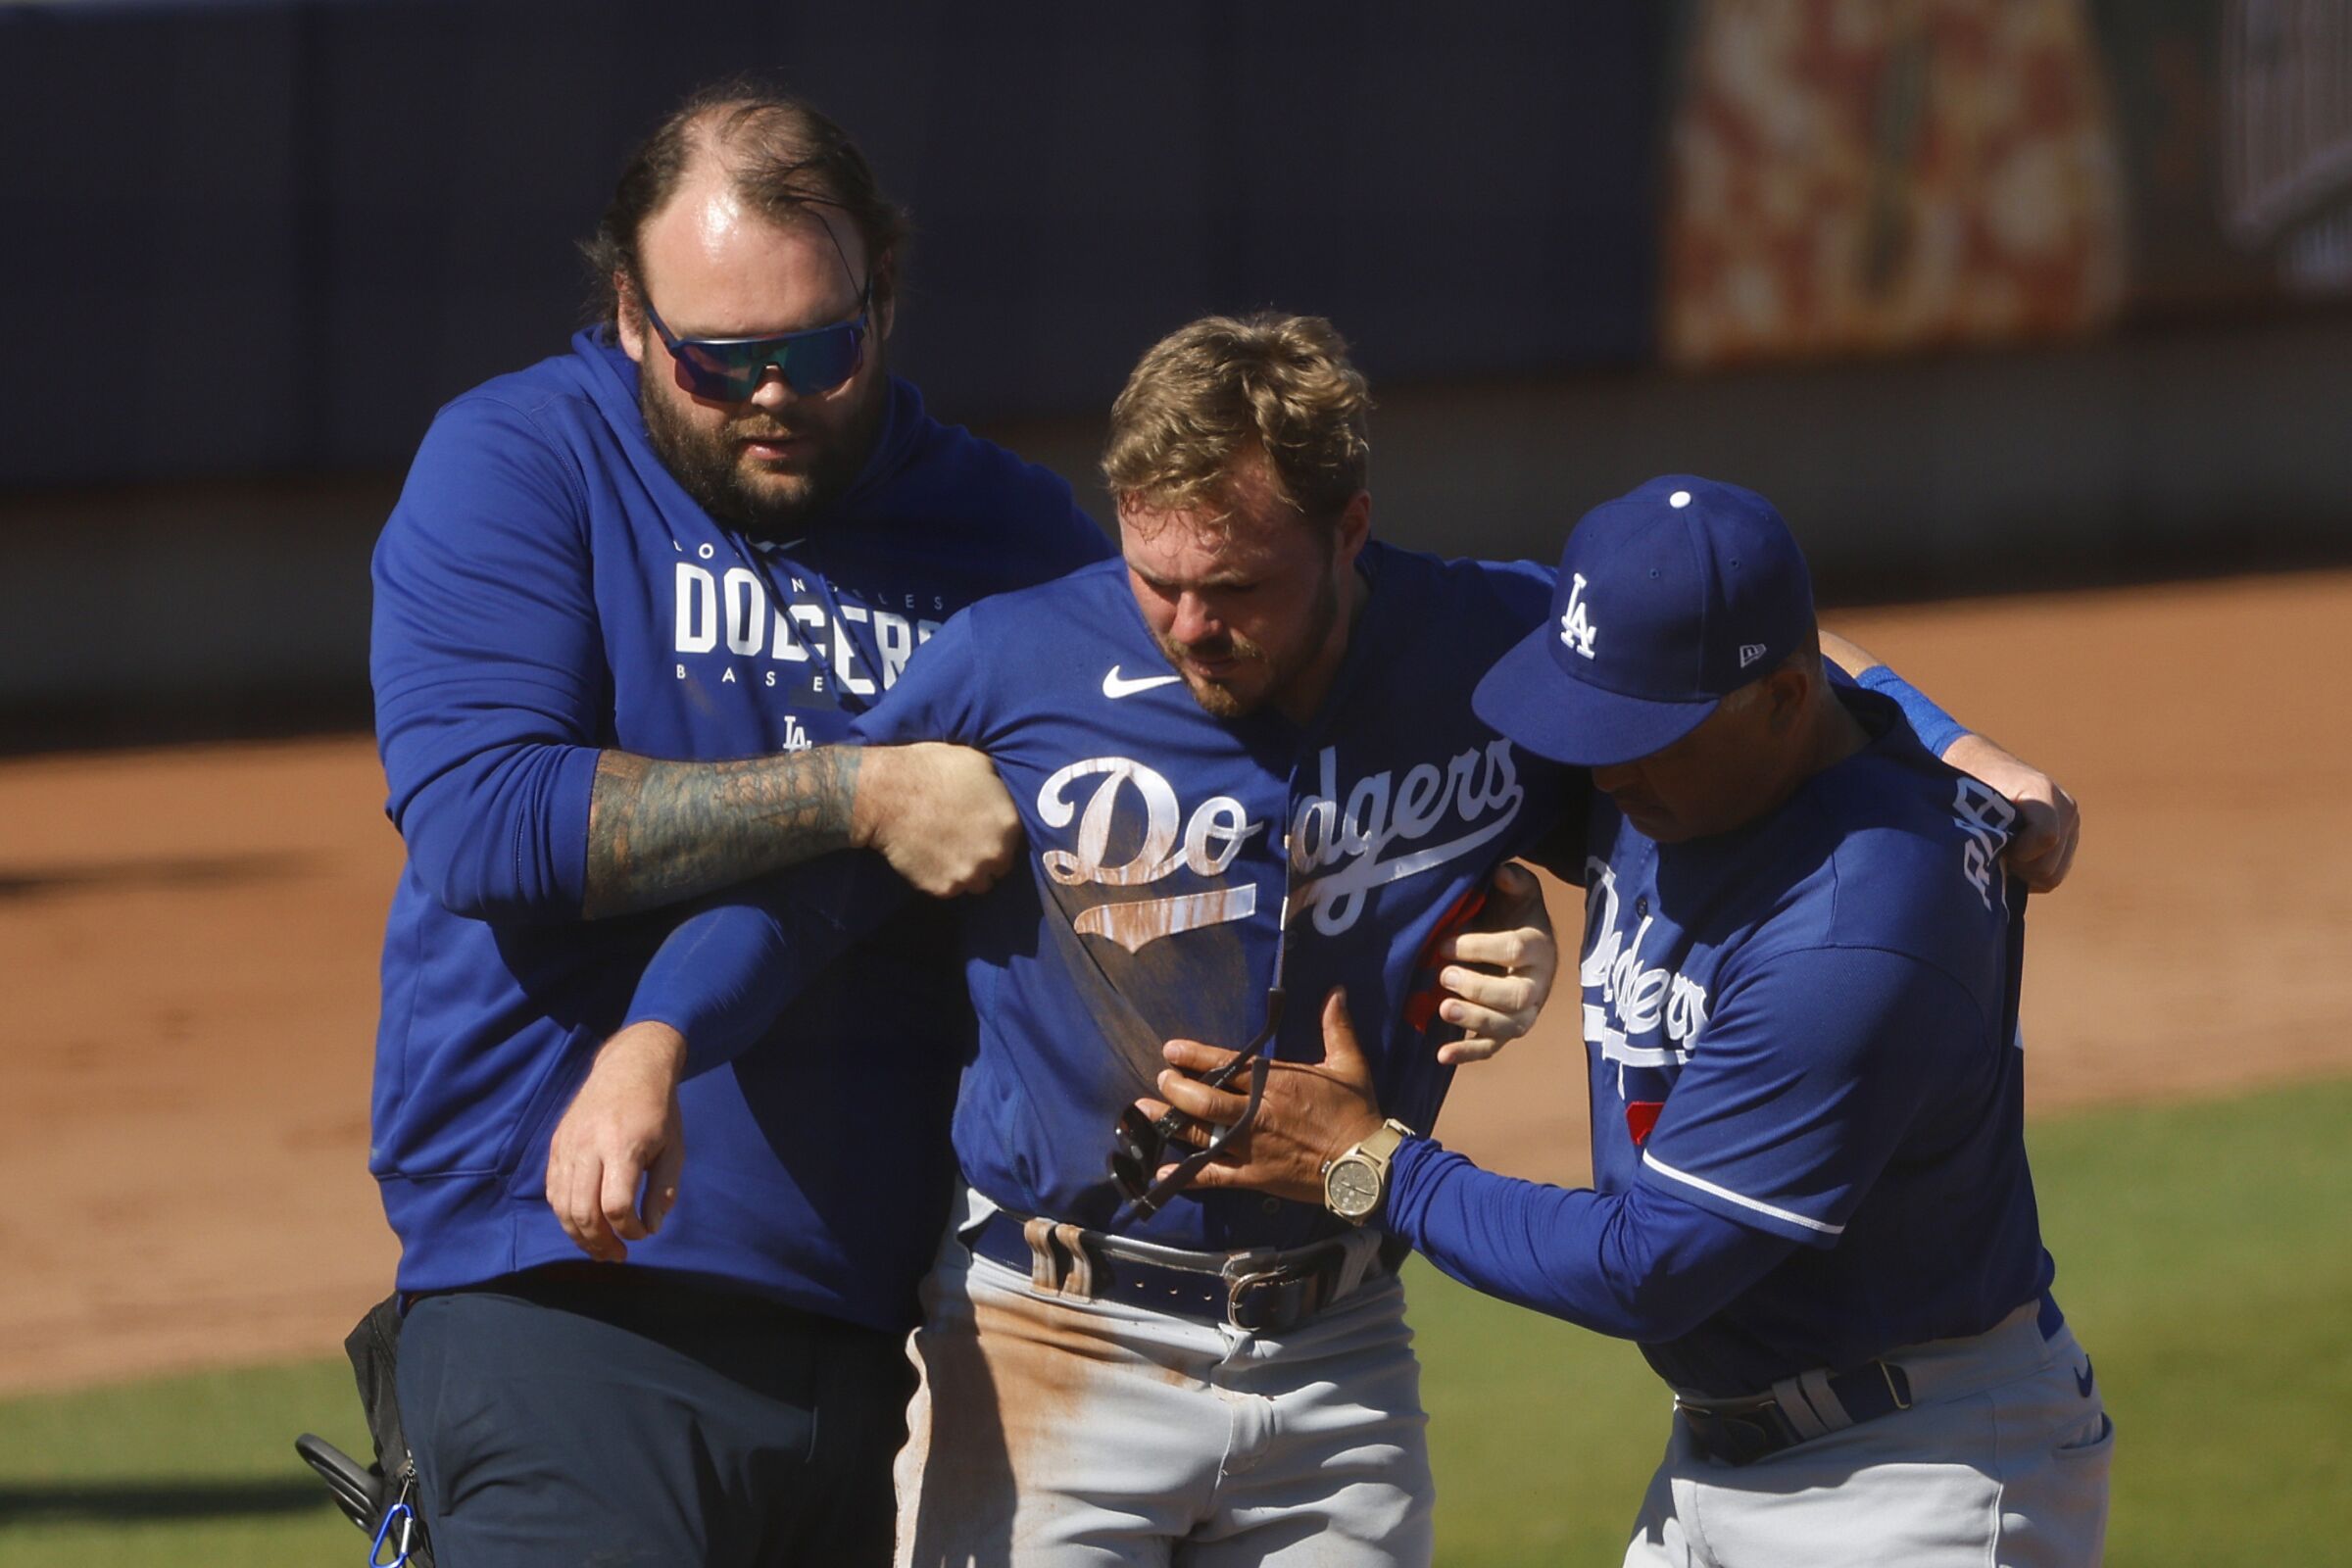 The Dodgers' Gavin Lux is loaded onto a cart with the help of a trainer and manager Dave Roberts after getting injured.